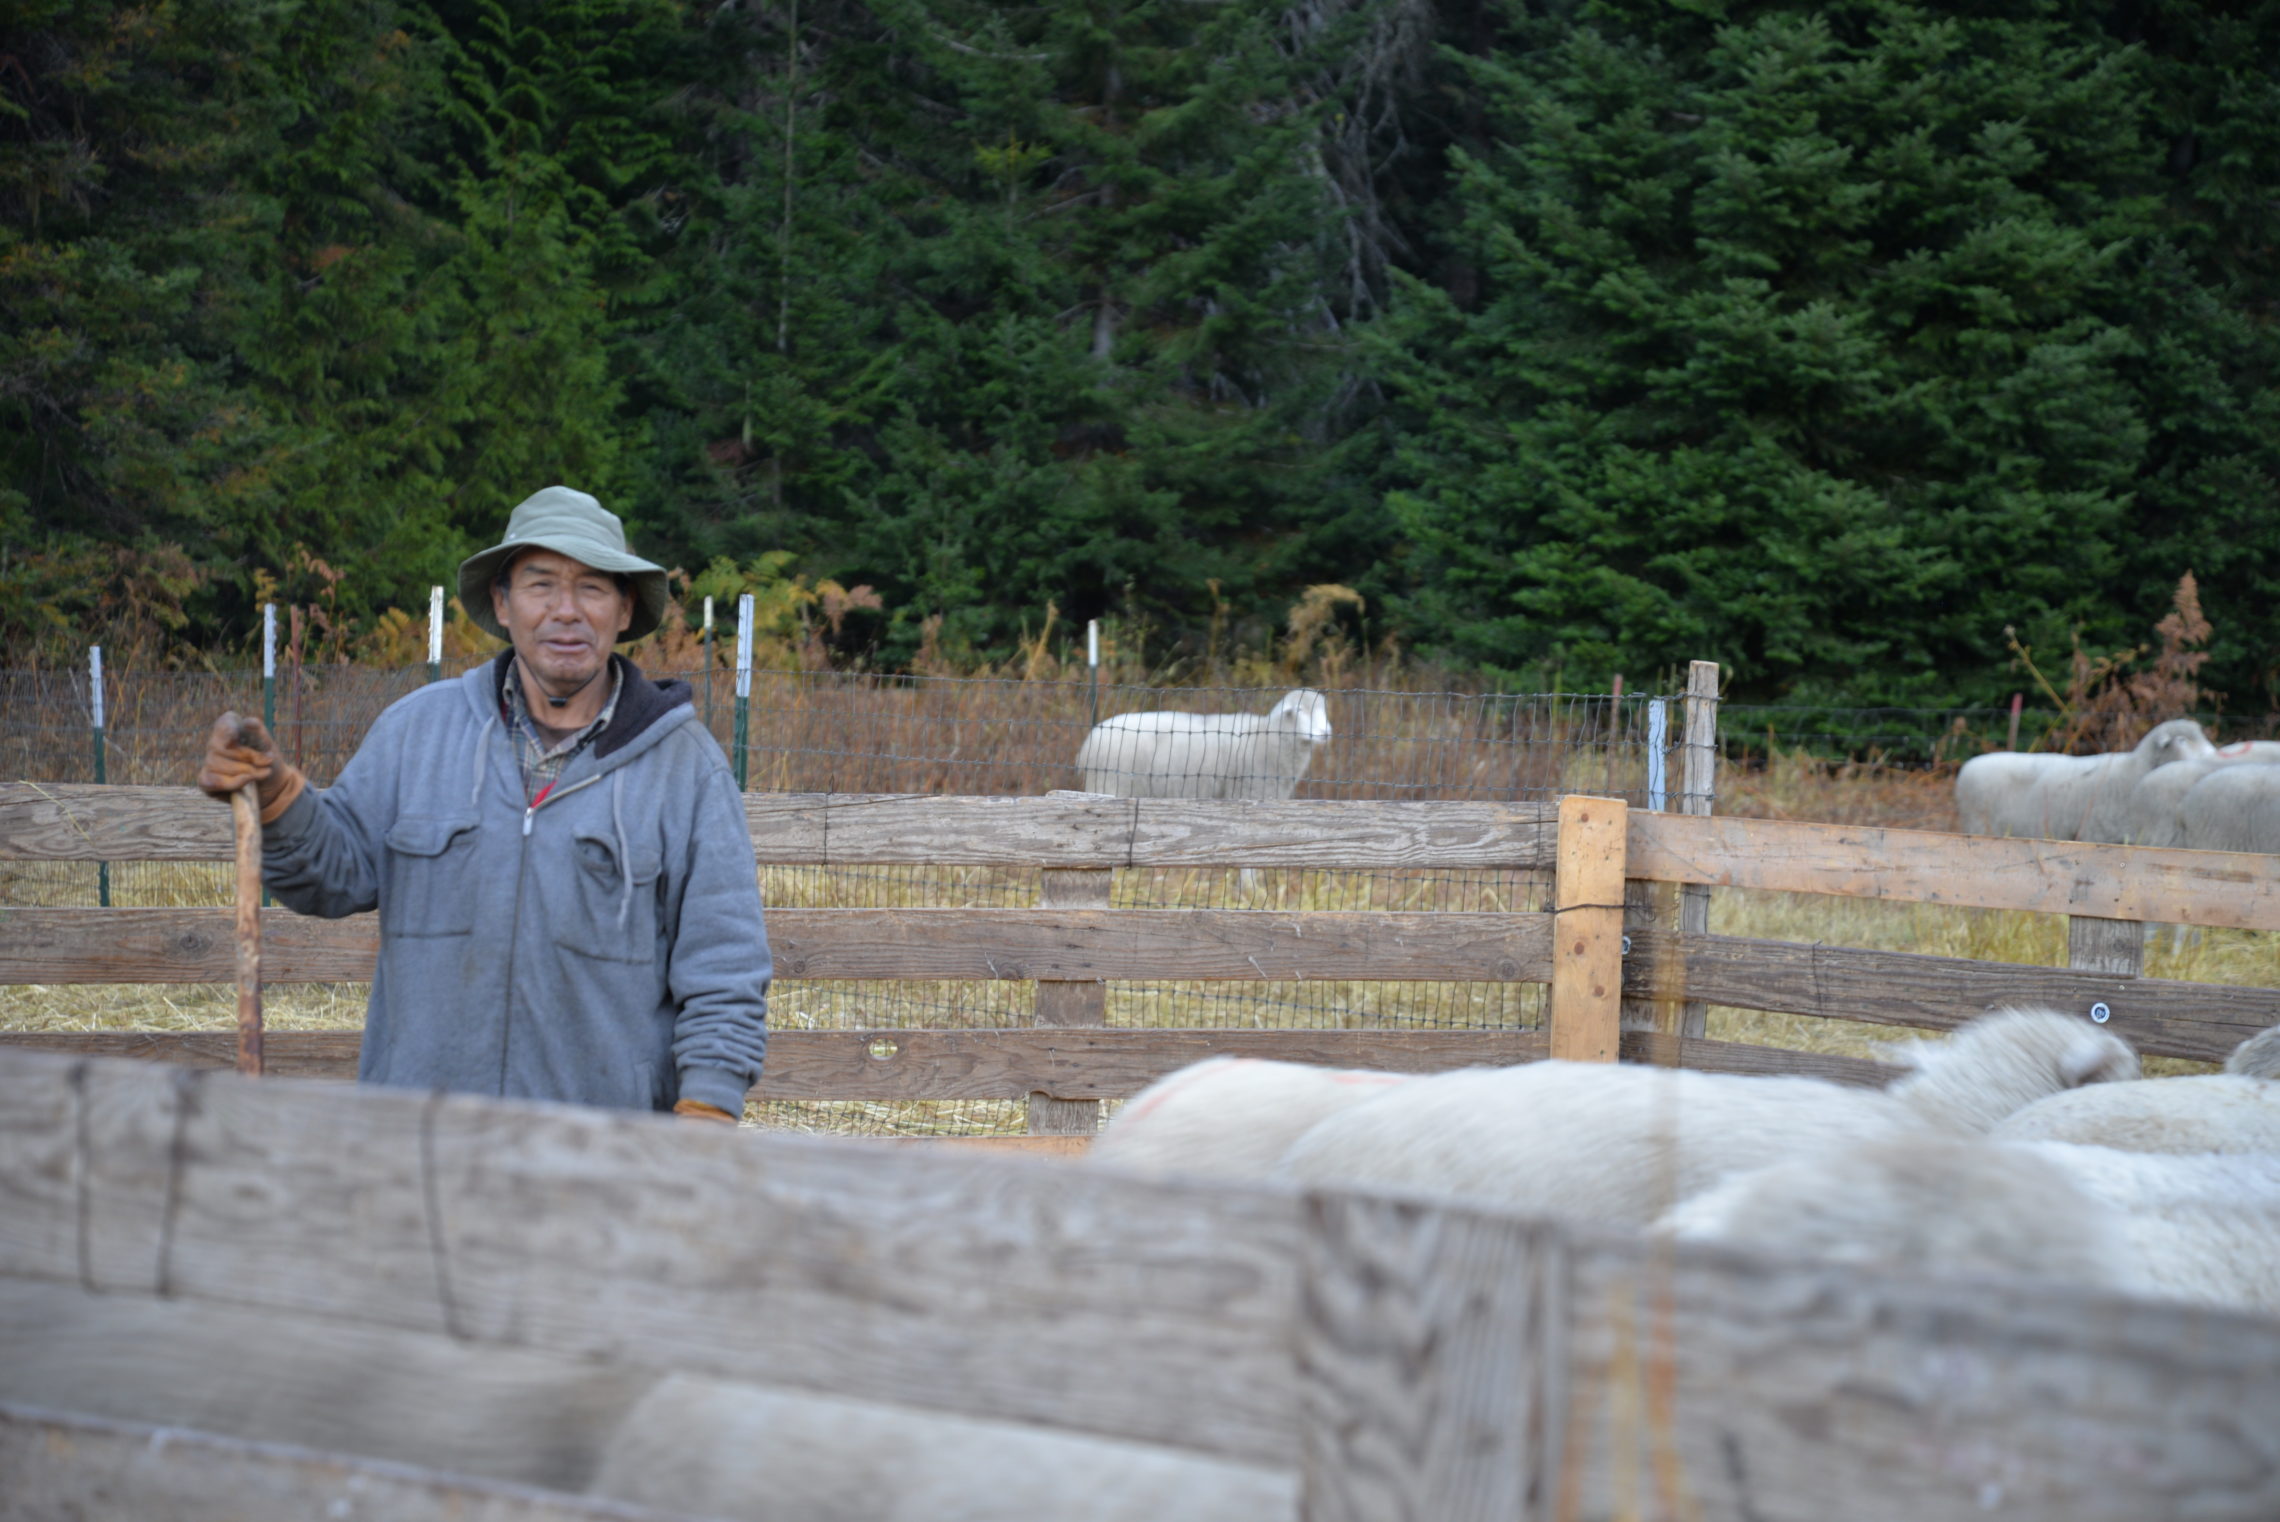 Geronimo DeLaCruz Lozano is one of the eight, H-2A workers who came from Peru to work with the Martinez family. He’ll spend most of his time alone with his dogs, walking across grasslands and mountains grazing thousands of sheep at a time. CREDIT: ESMY JIMENEZ